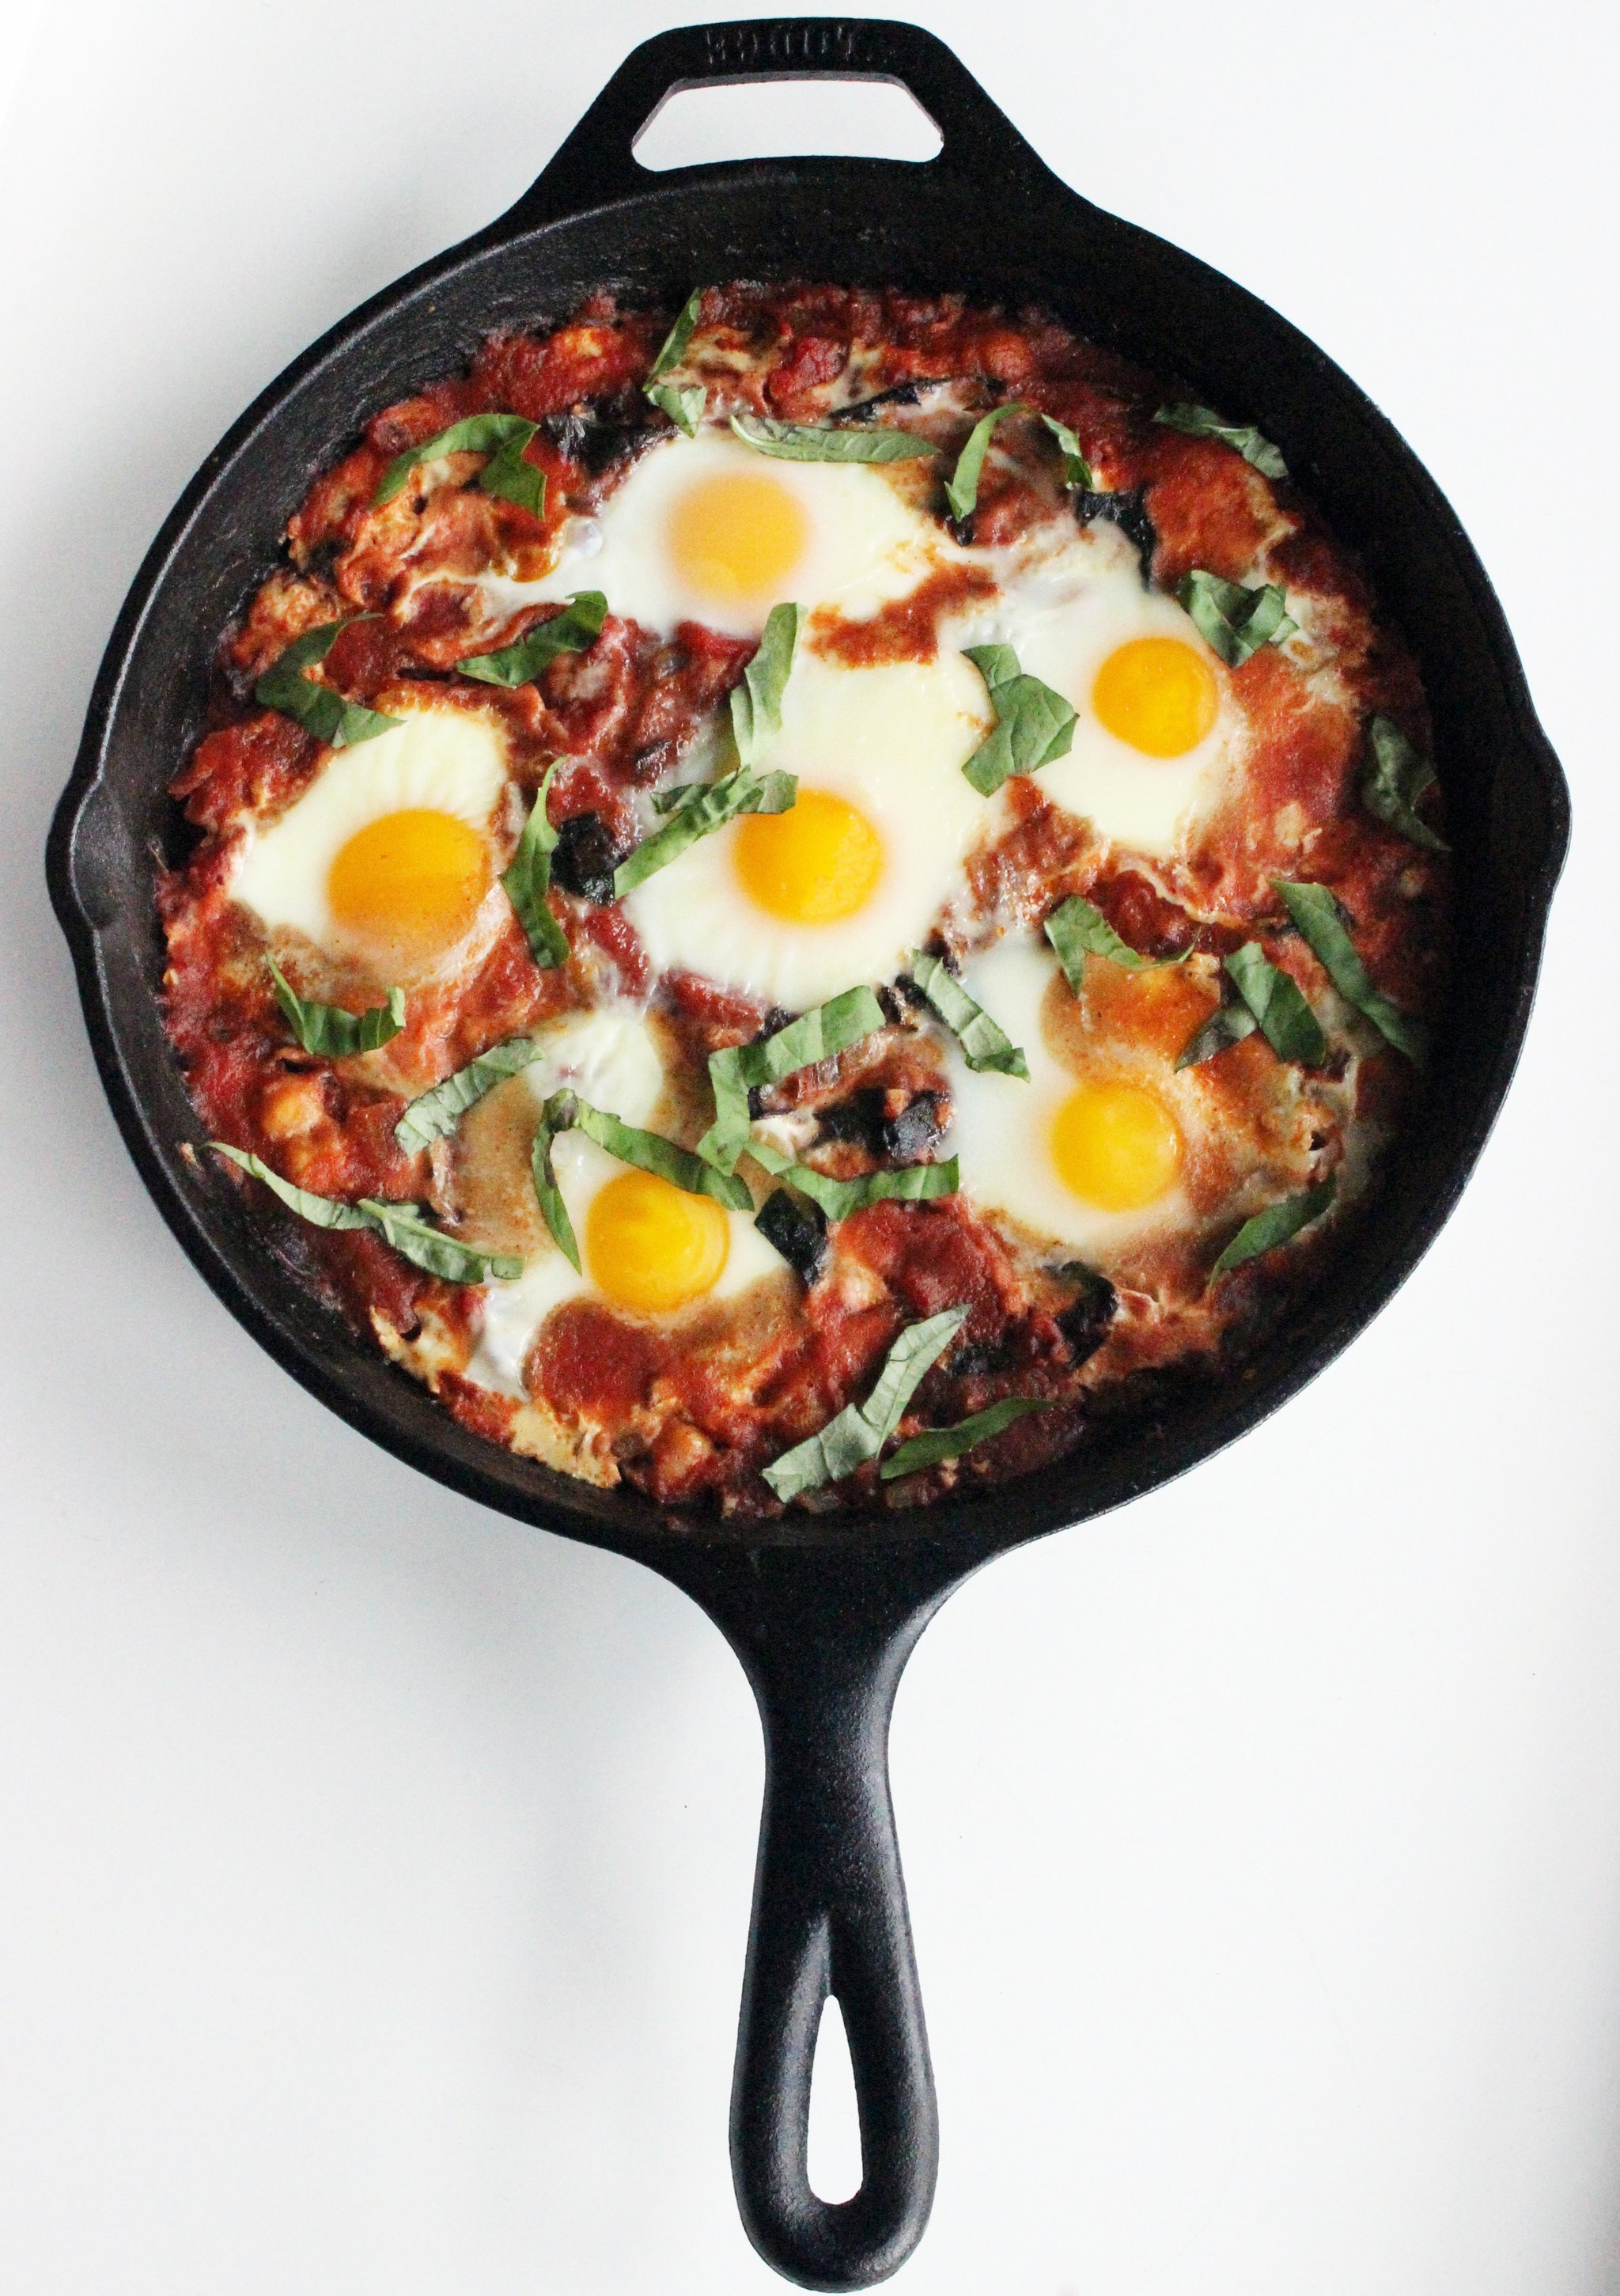 25 high protein breakfast recipes for weight loss. Eat good source of protein for breakfast. Poached eggs with tomato, swiss chard, and chickpeas. Best fat burning high protein breakfast ideas. Rich protein meals. 